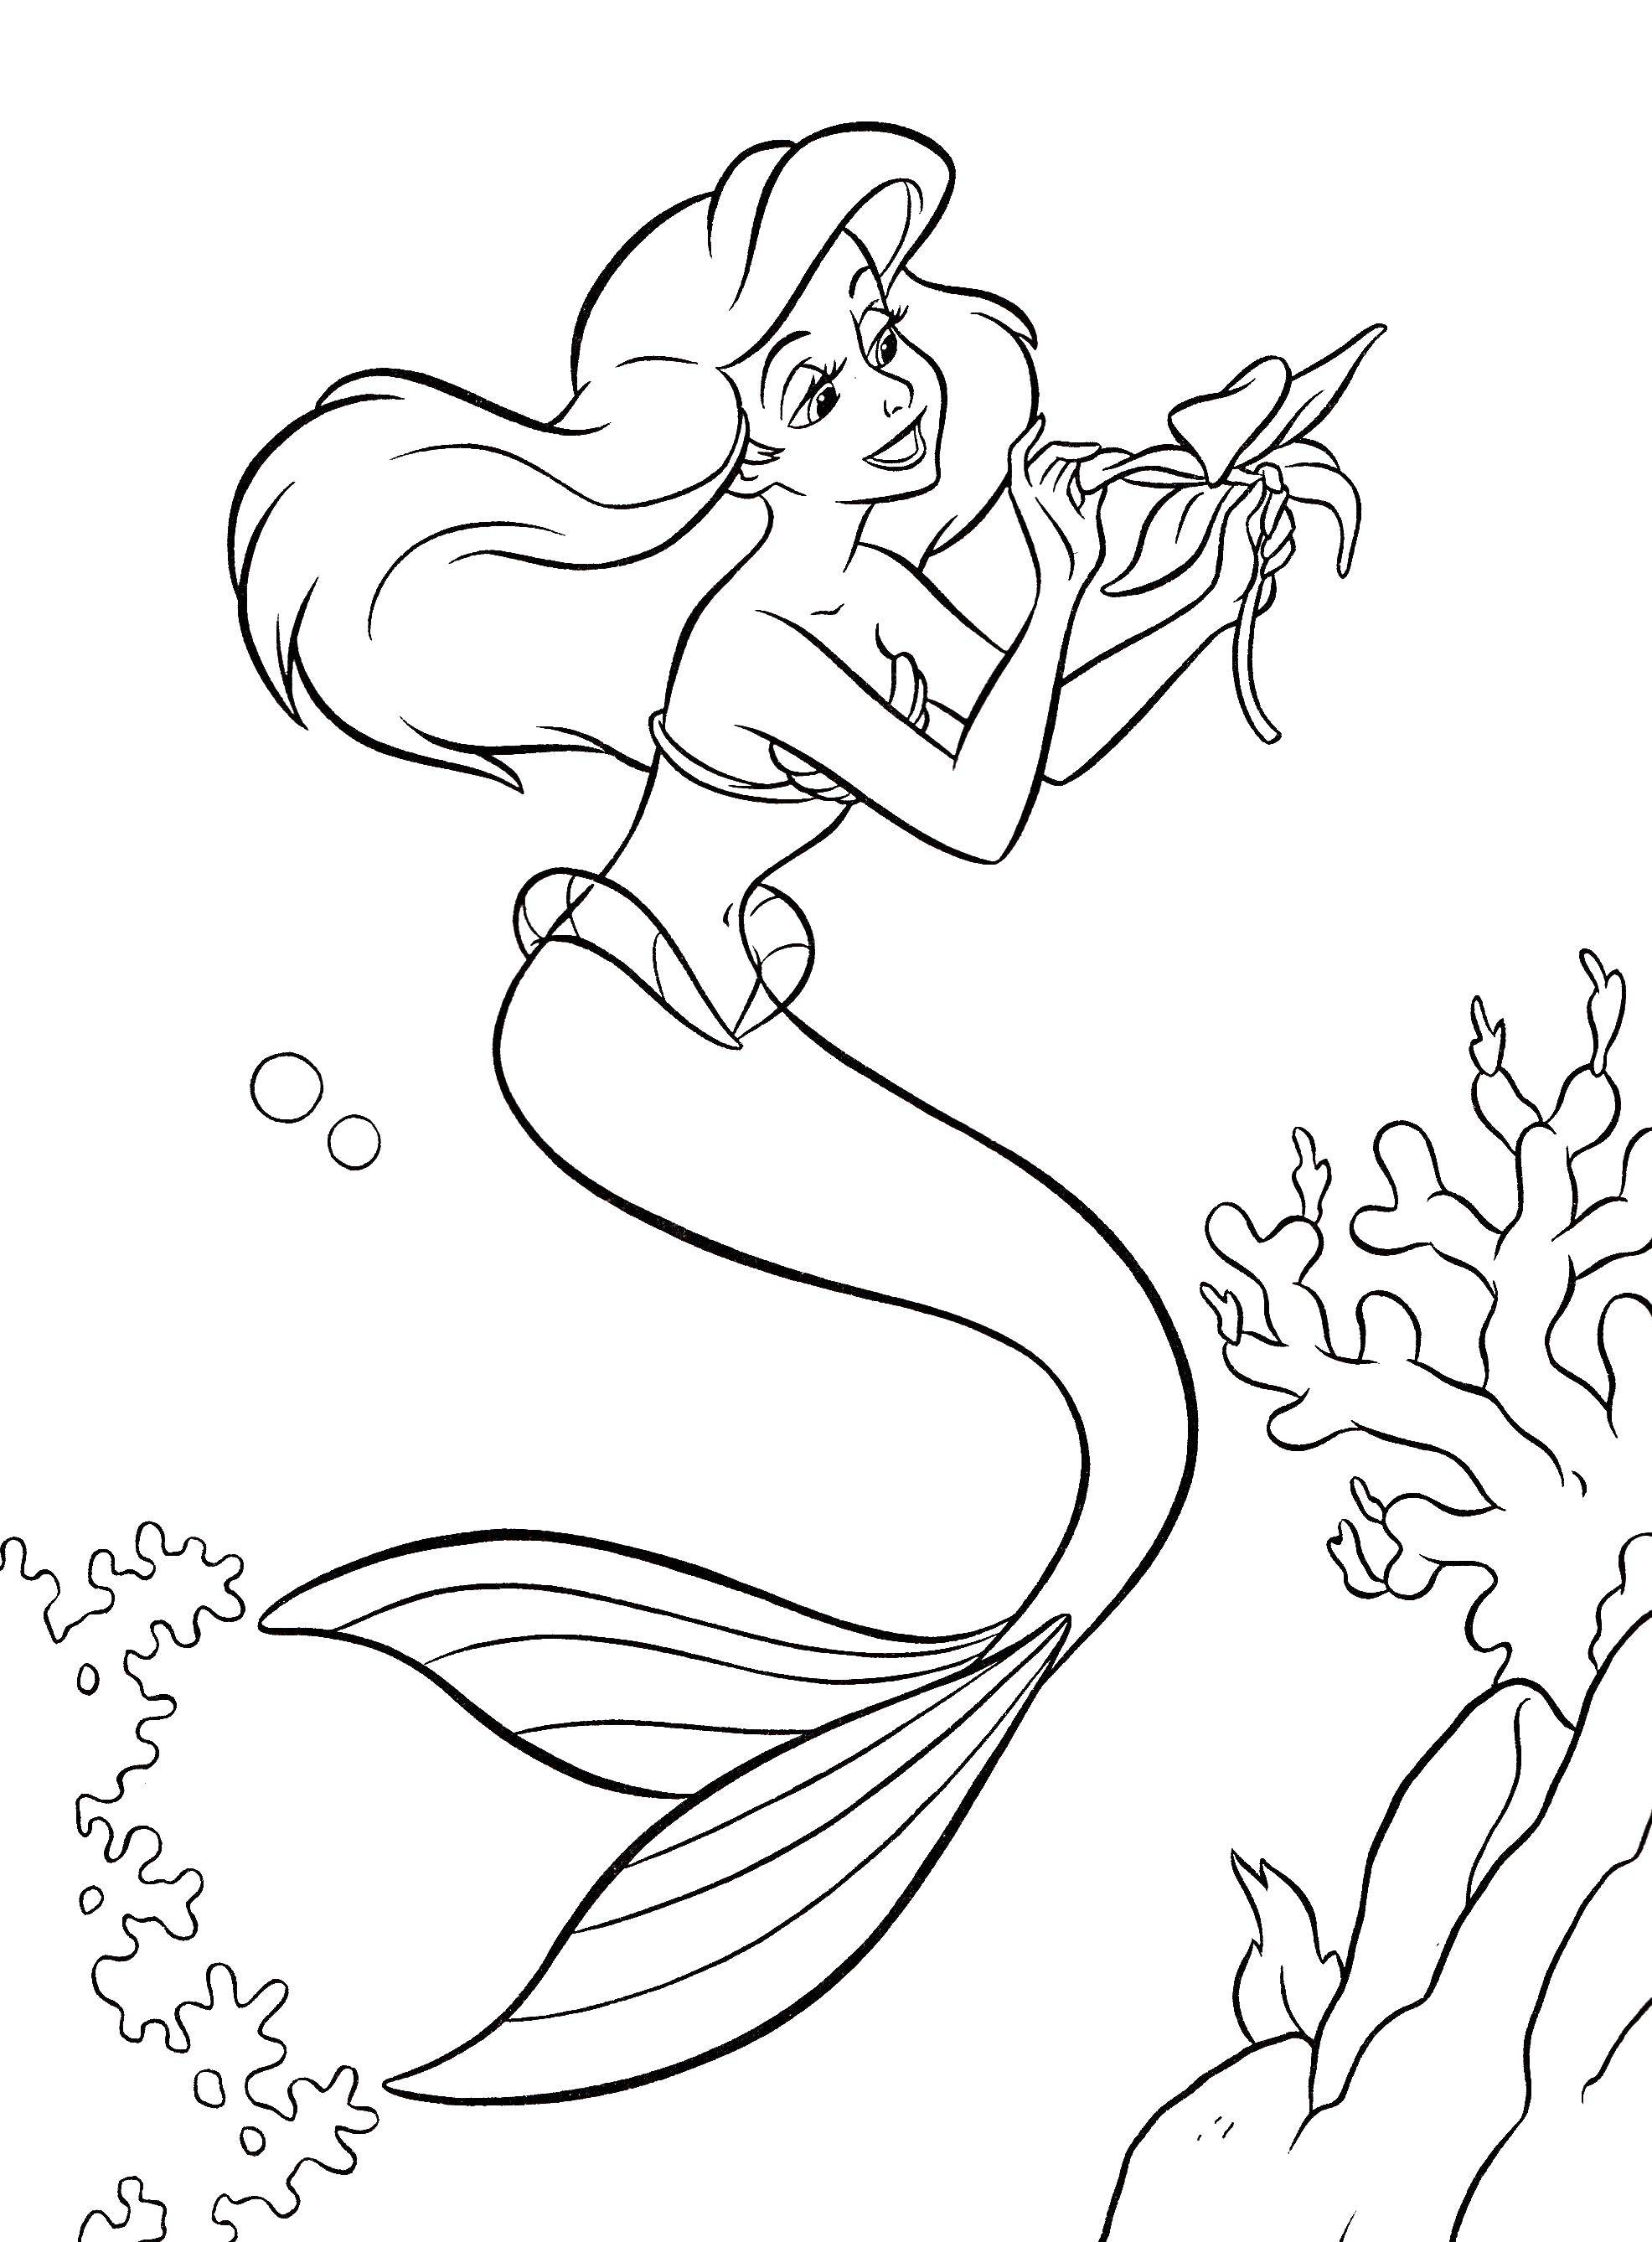 Coloring The little mermaid Ariel from the disney cartoon with flower. Category Princess. Tags:  Disney, the little mermaid, Ariel.